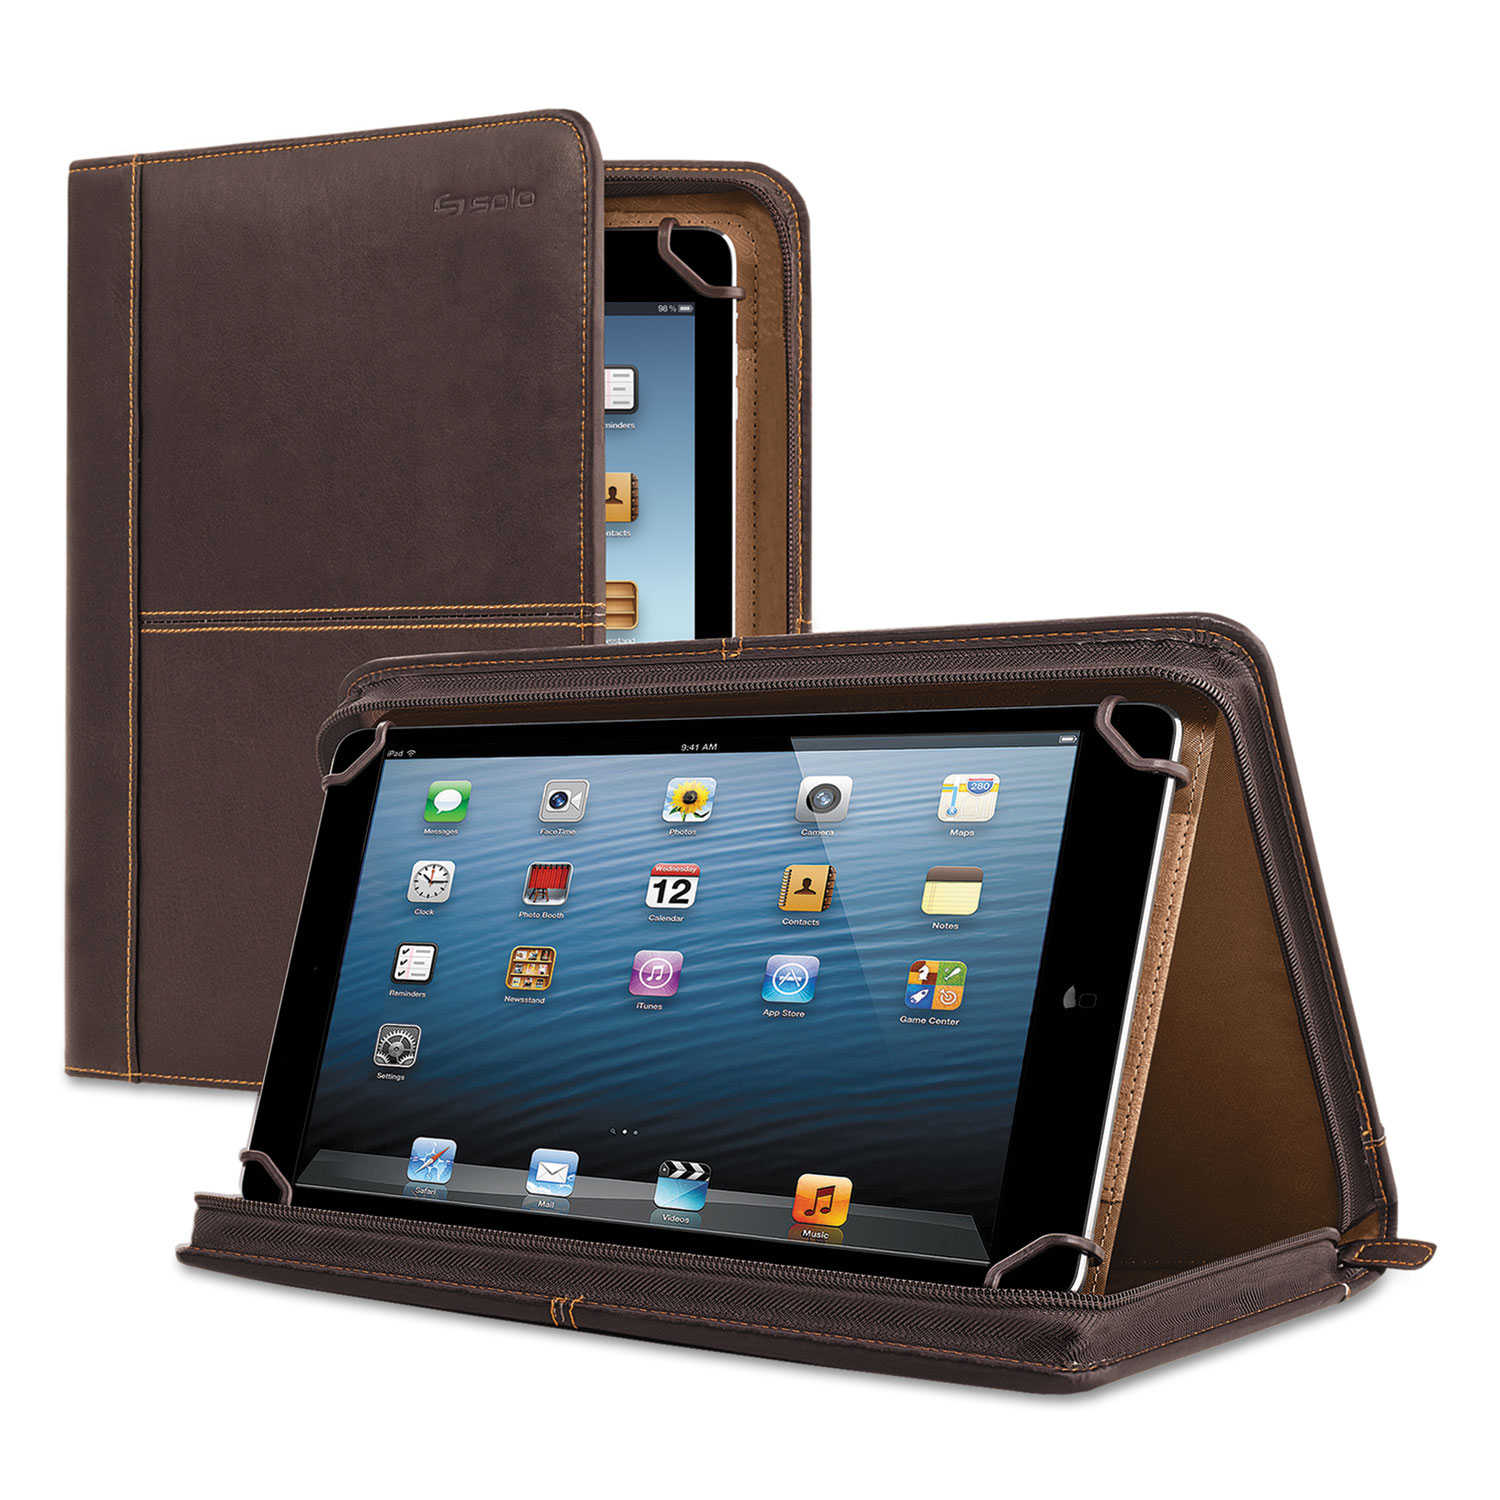  Solo VTA137-3 Premiere Leather Universal Tablet Case, Fits Tablets 8.5 up to 11, Espresso (USLVTA1373) 